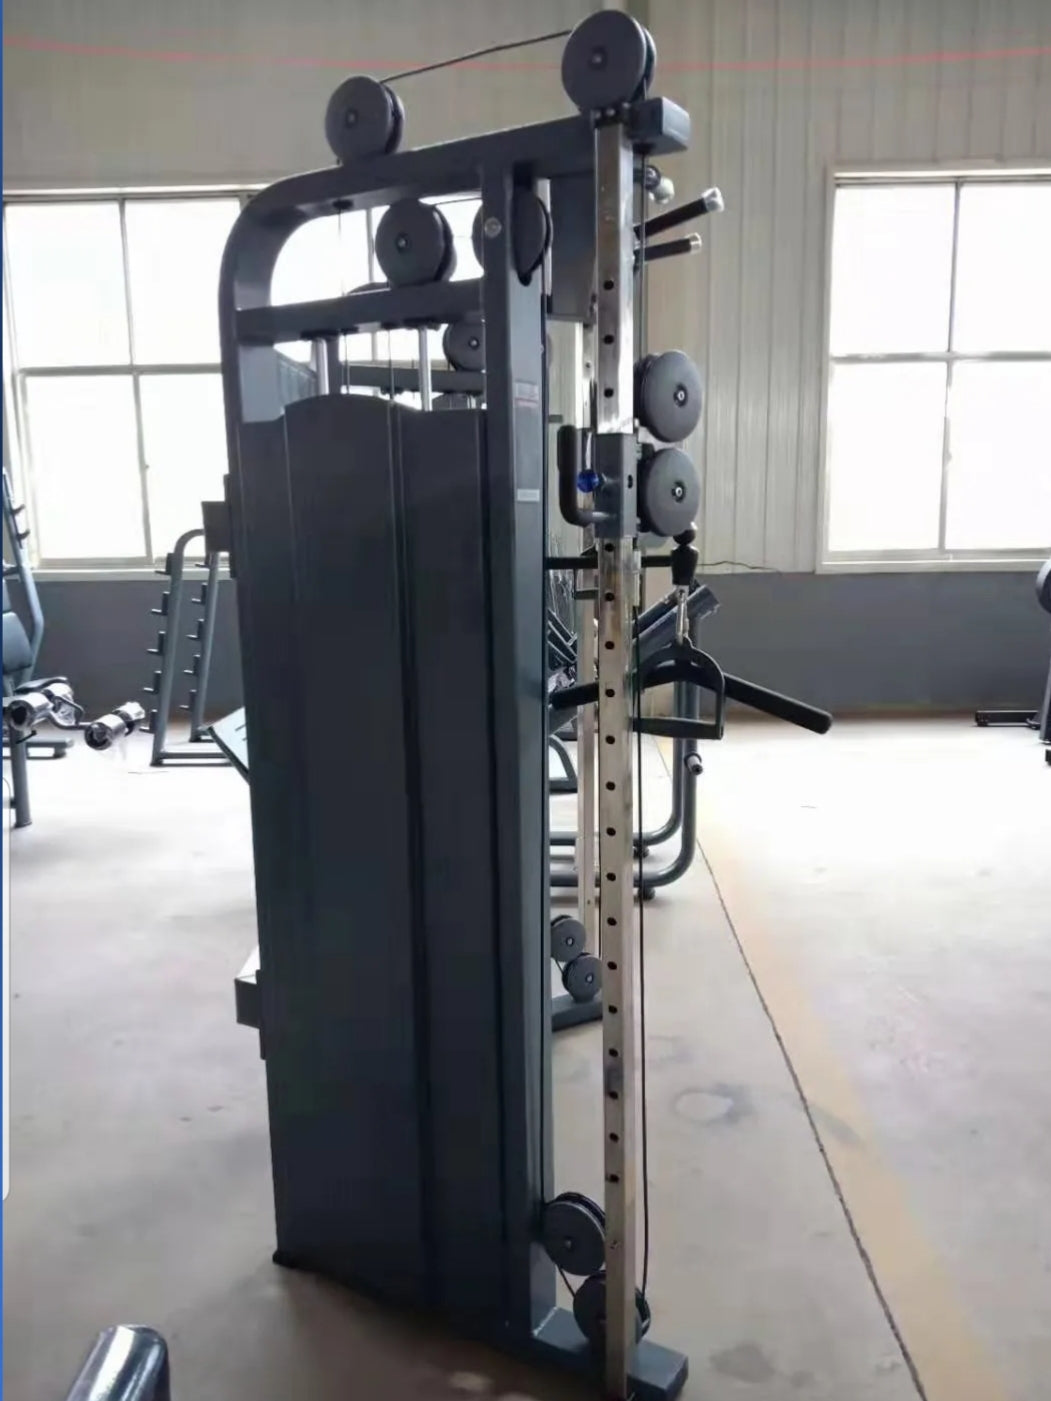 IC-FT17 Functional Trainer Commercial Gym Machine